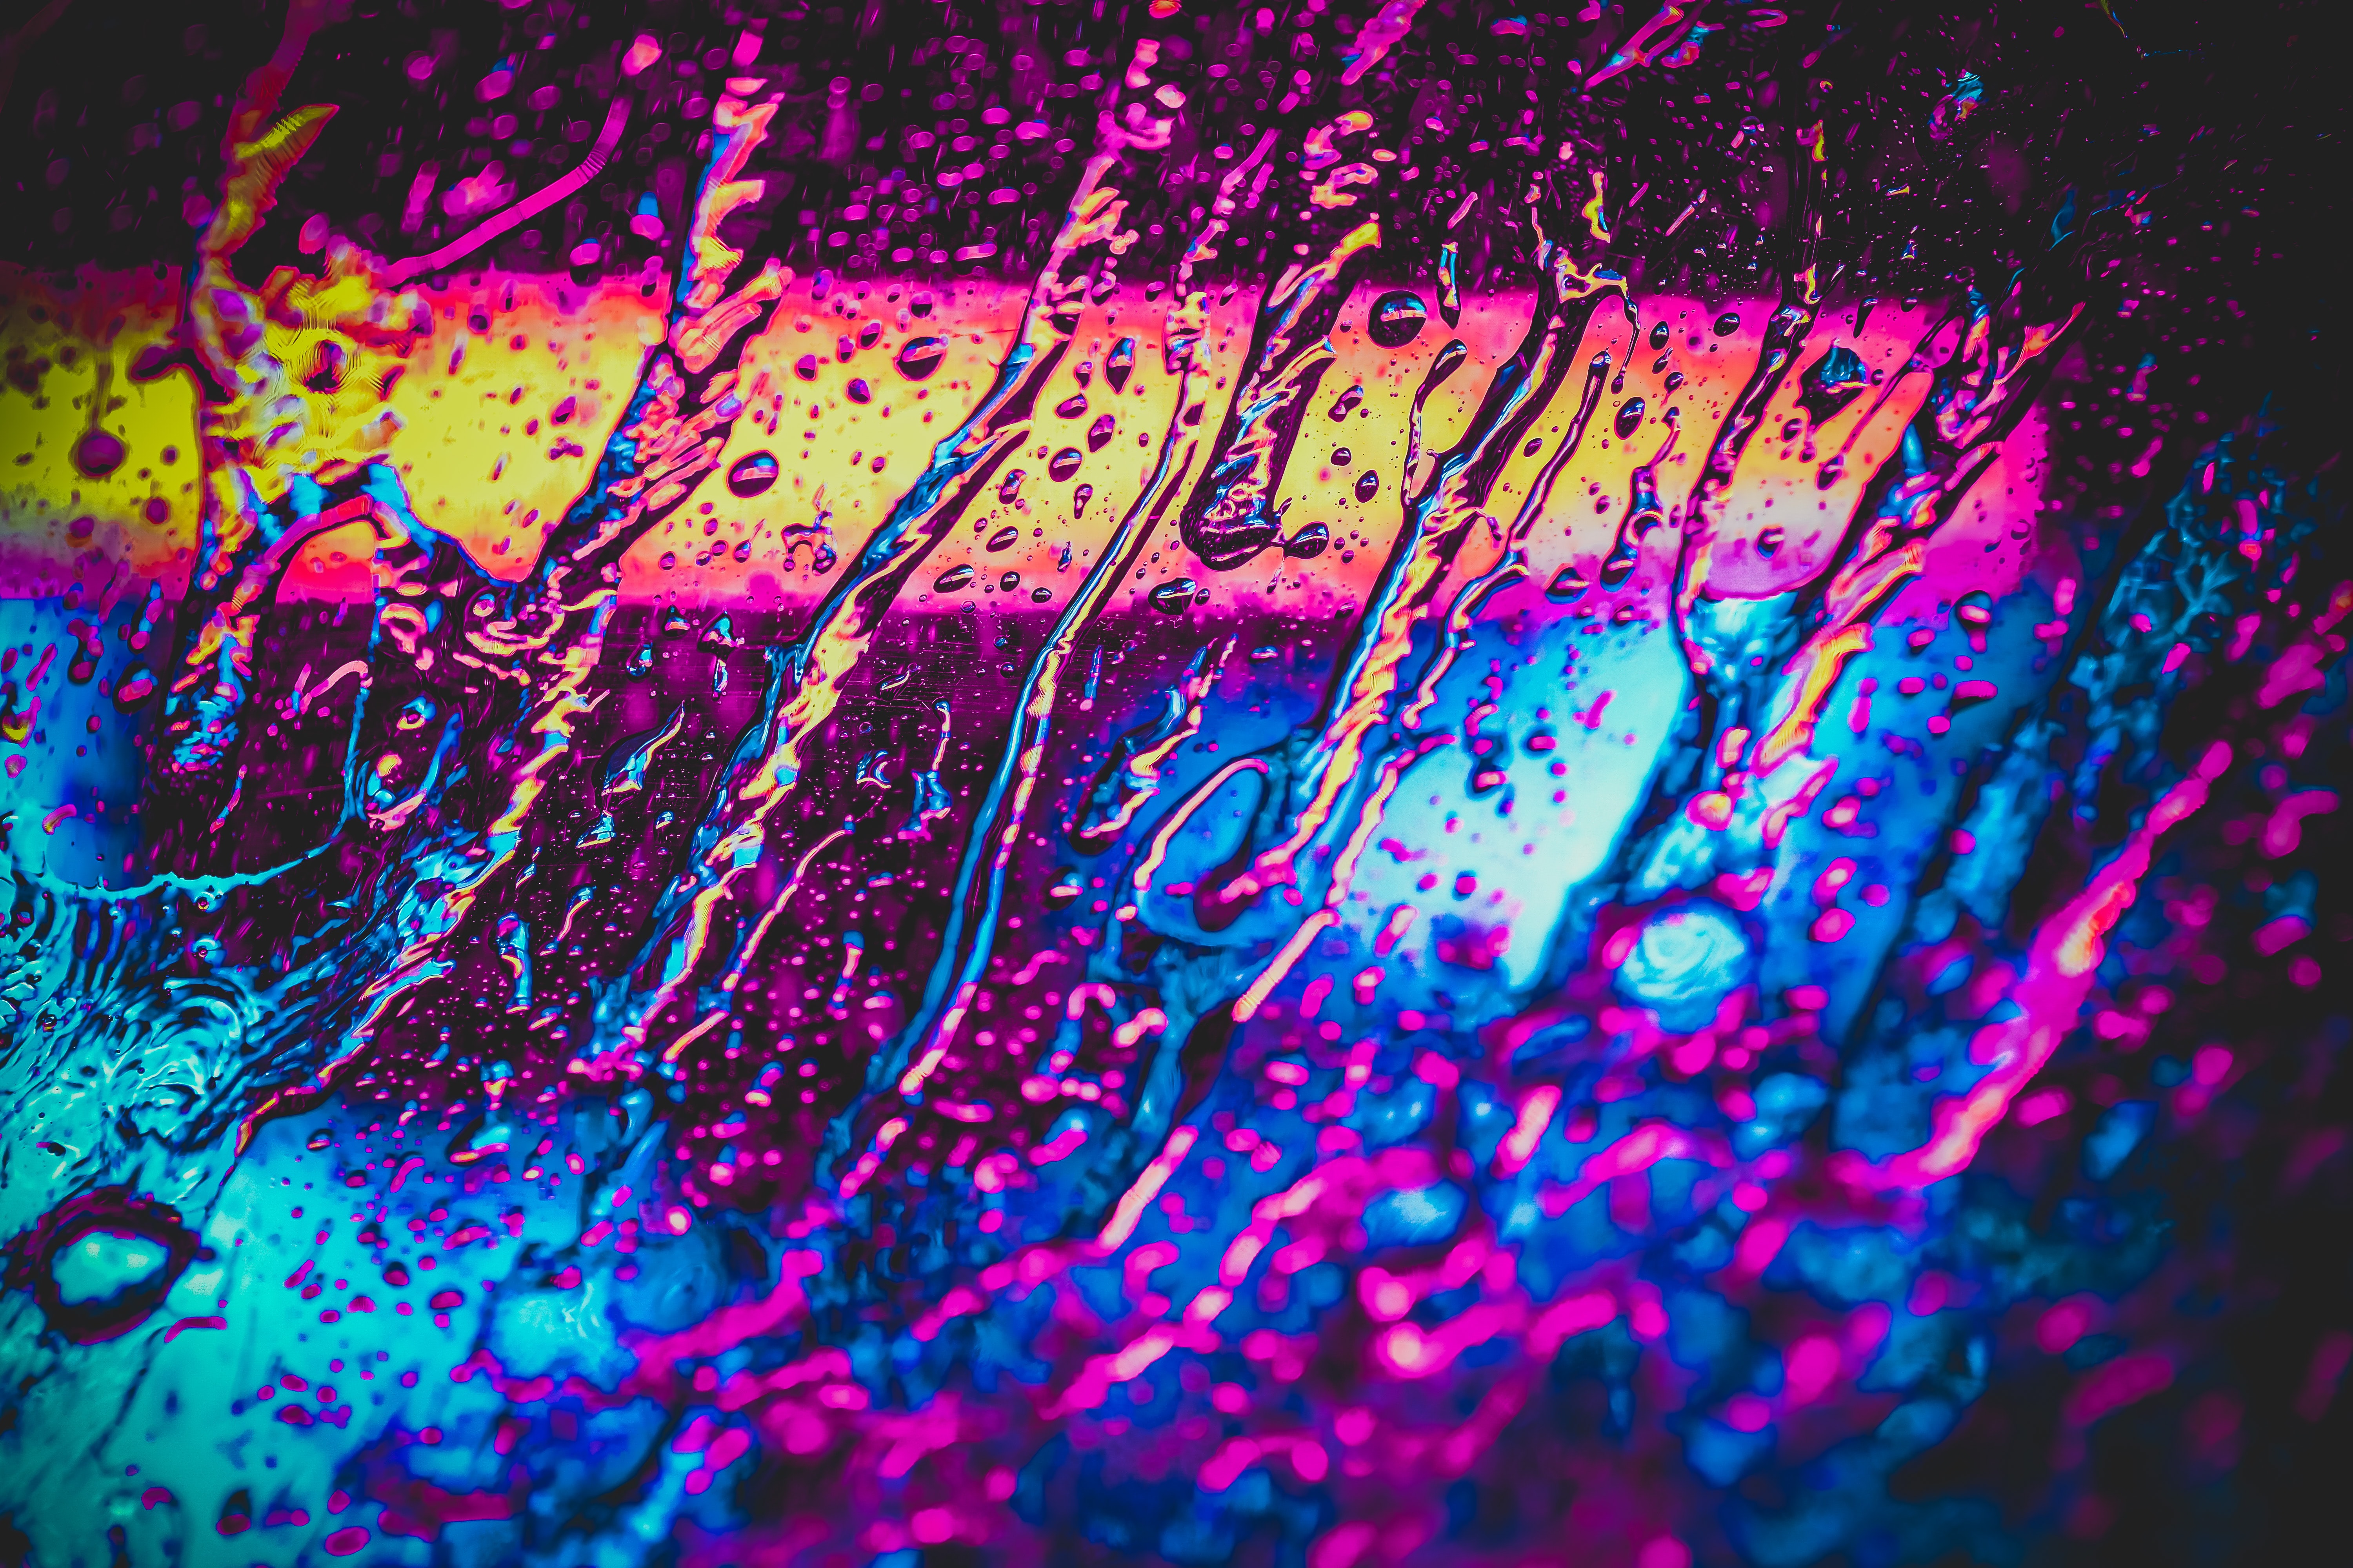 130951 download wallpaper abstract, drops, multicolored, motley, surface screensavers and pictures for free